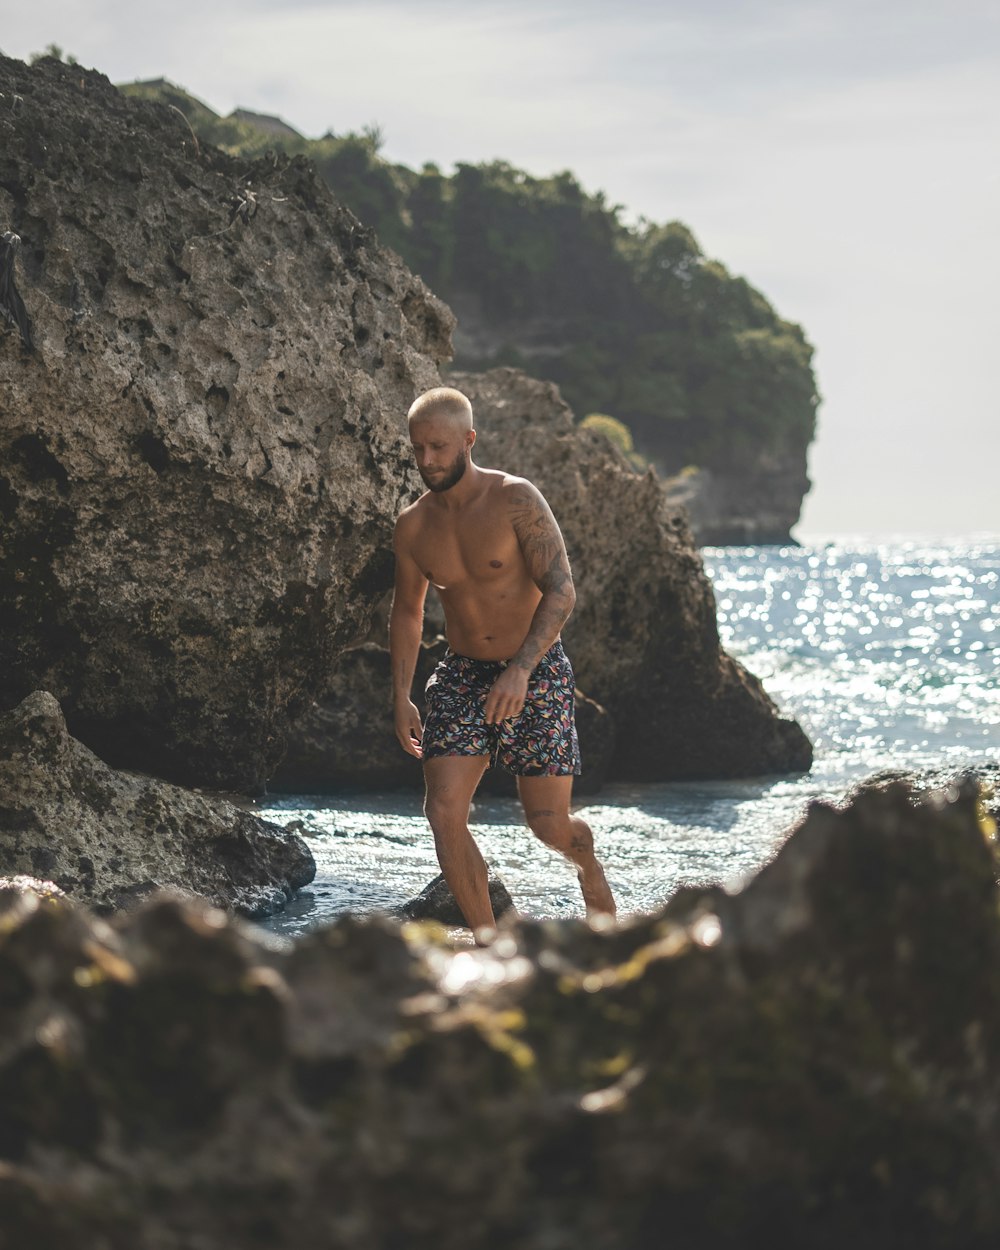 a shirtless man standing on a rocky beach next to the ocean